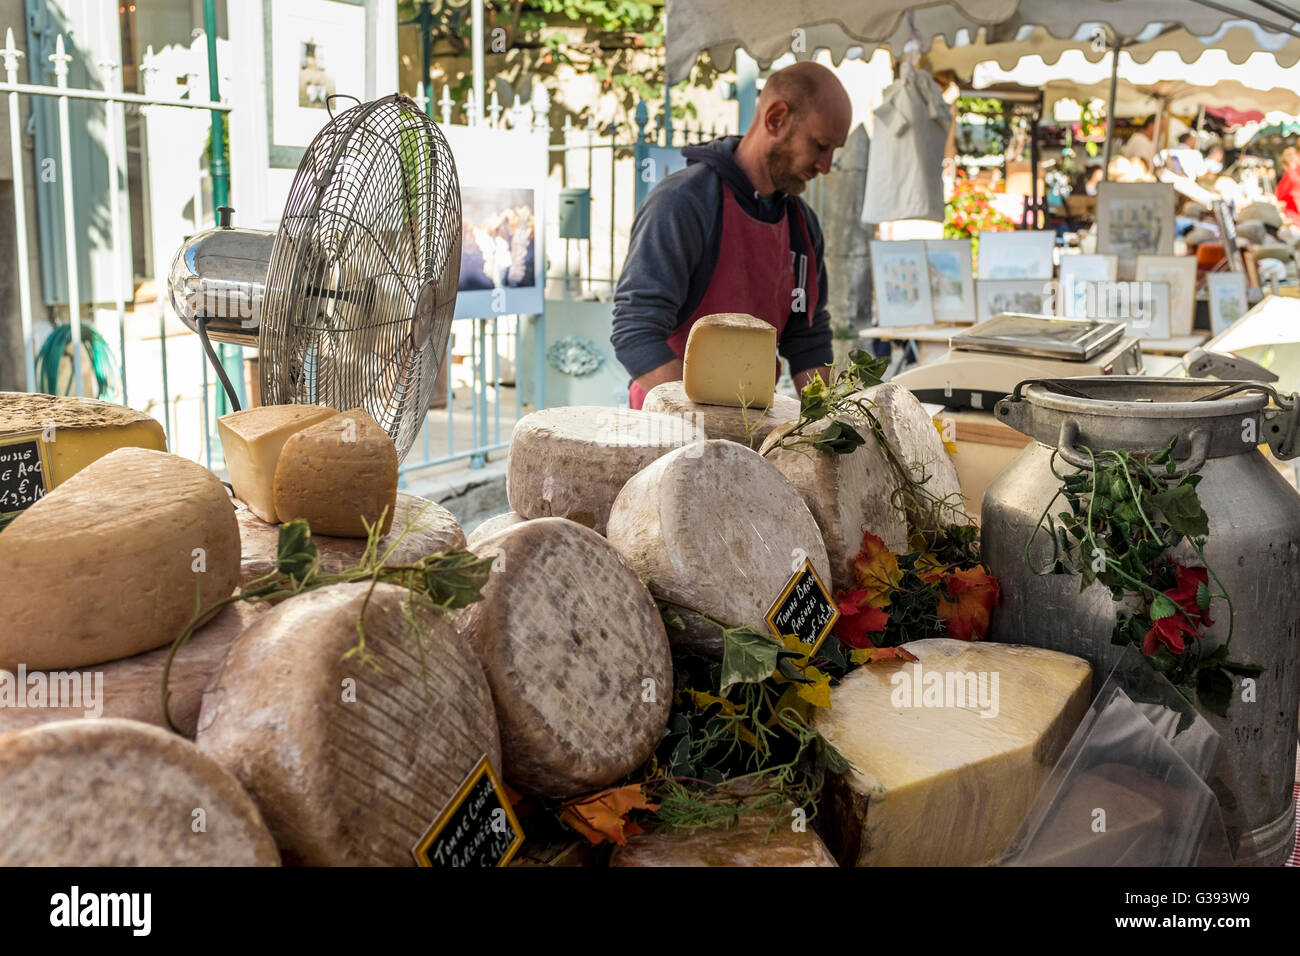 Outdoor market stall in Lourmarin selling cheese, Luberon, Vaucluse, Provence-Alpes-Côte d'Azur, France Stock Photo